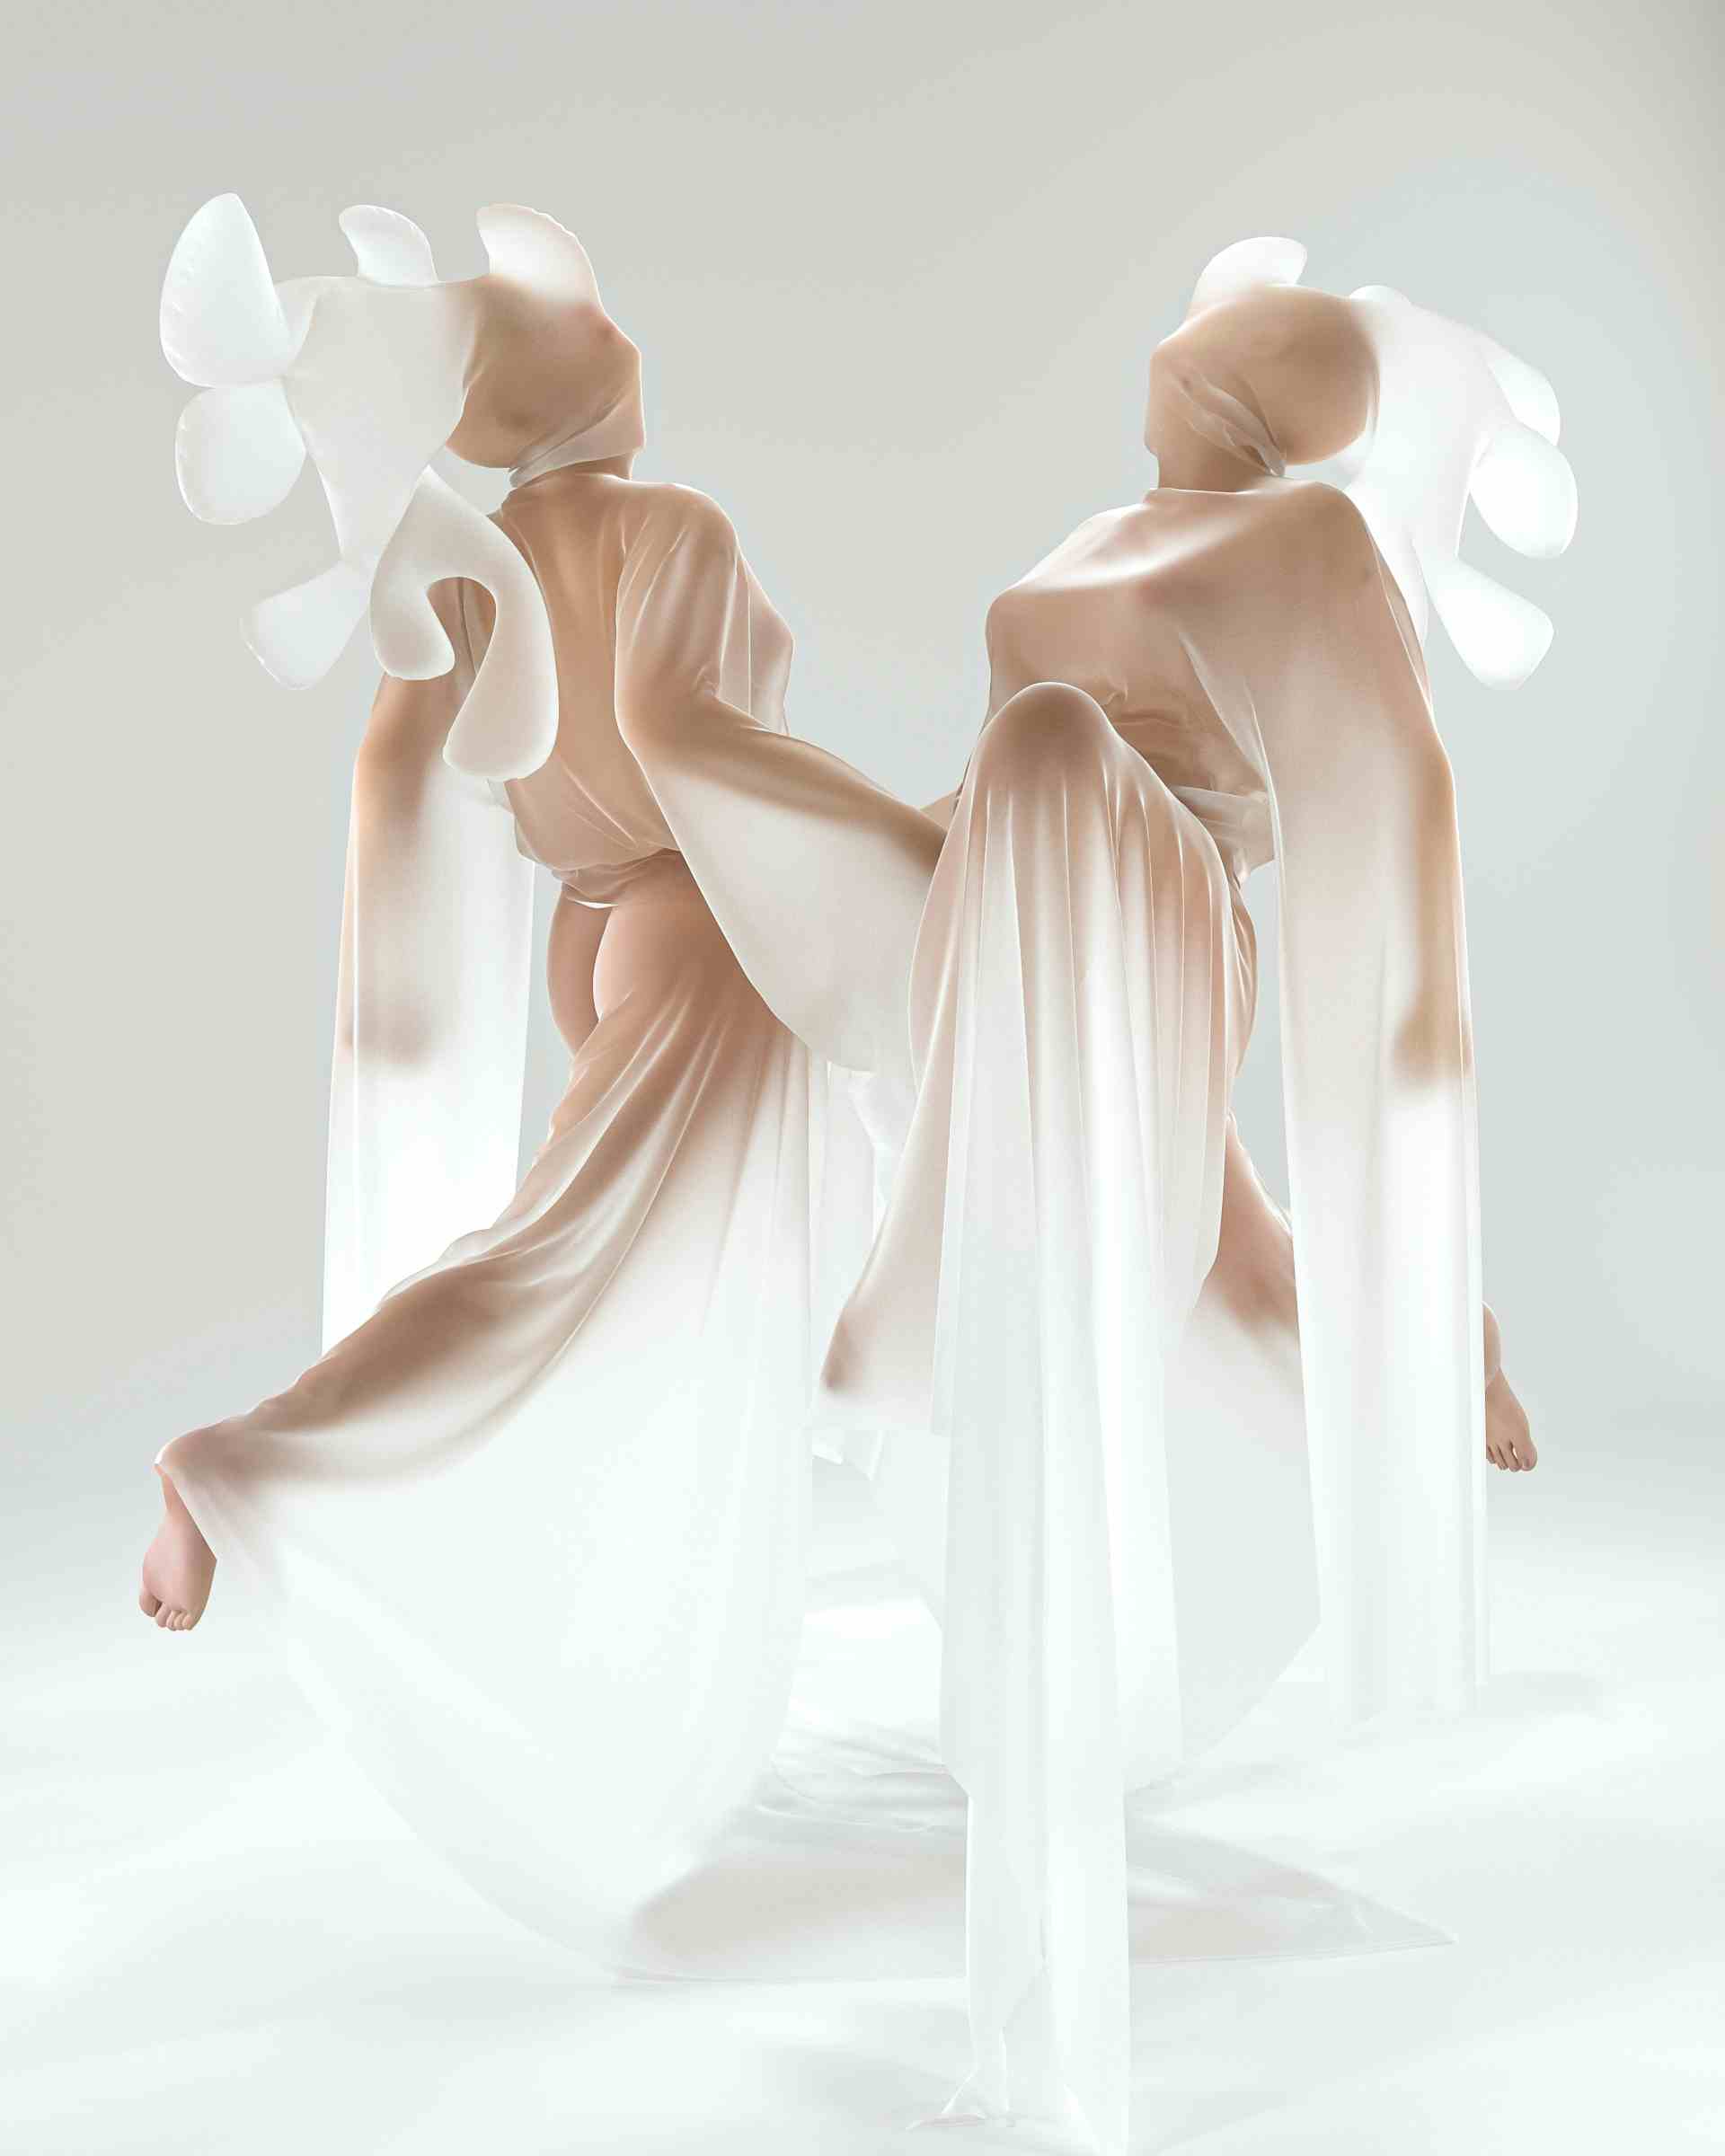 The Dance of Translucent Twins